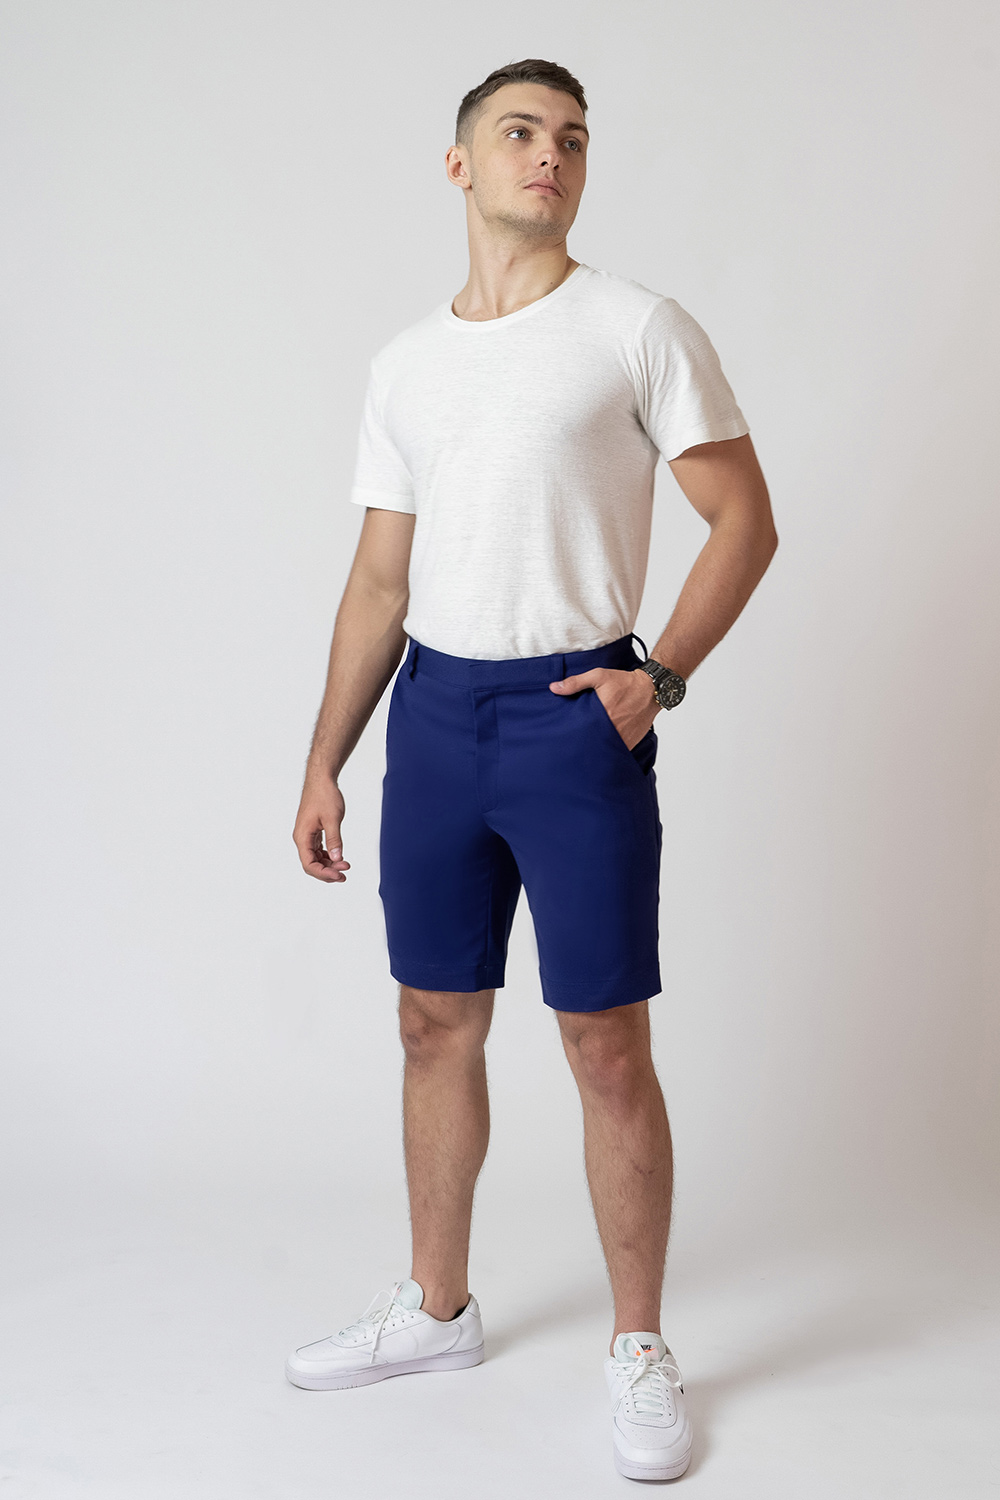 All Day Shorts - All Day Chino Shorts - Rhapsody Culture Shorts